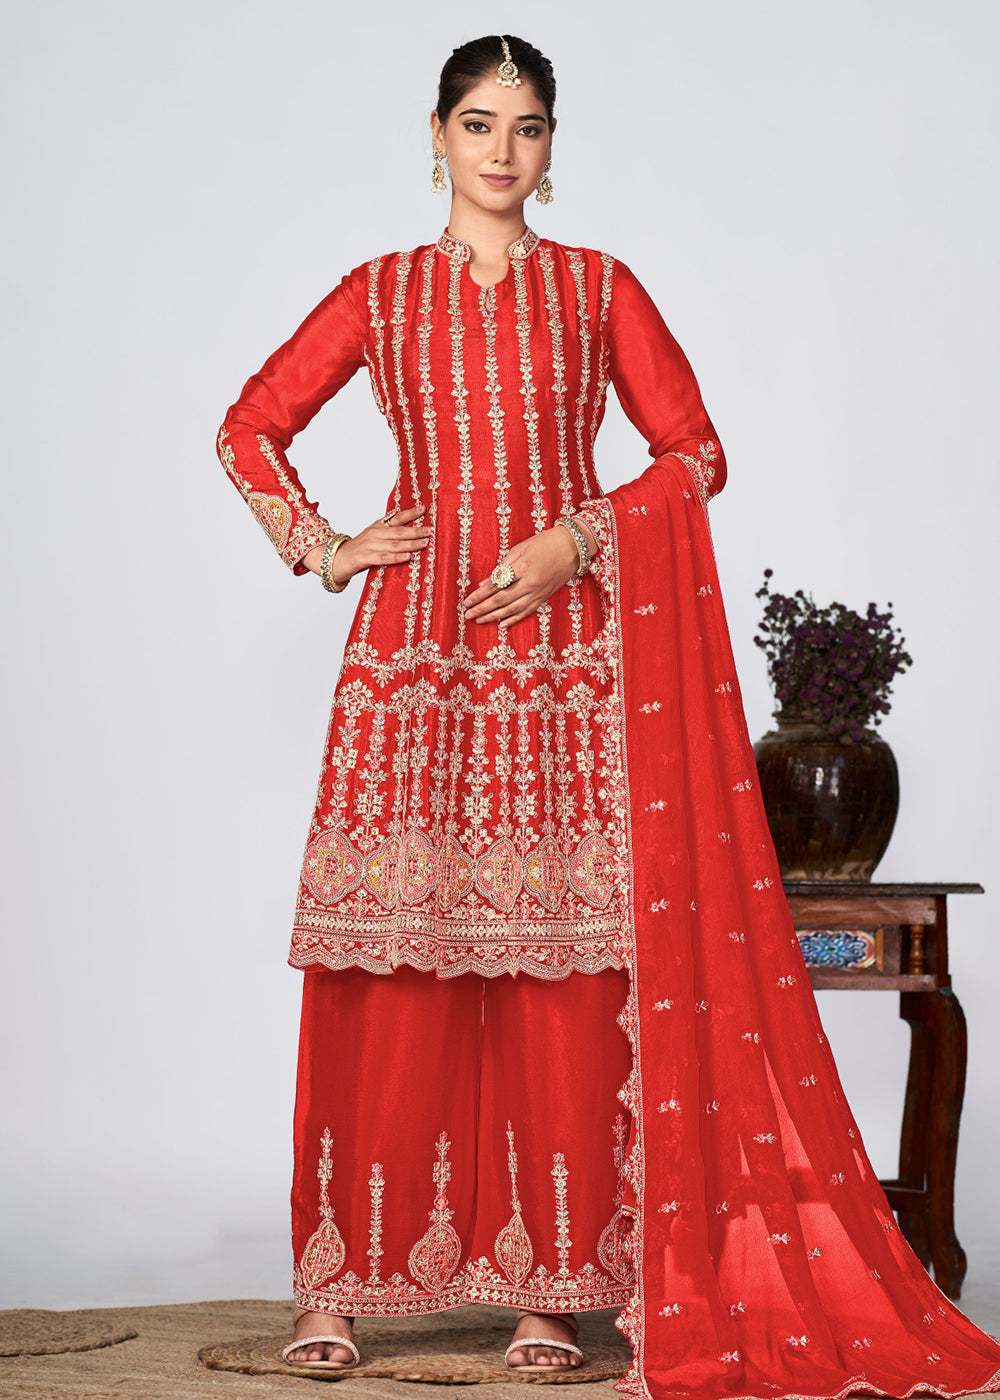 Buy Now Hot Red Heavy Chinnon Embroidered Festive Palazzo Suit Online in USA, UK, Canada, Germany, Australia & Worldwide at Empress Clothing. I